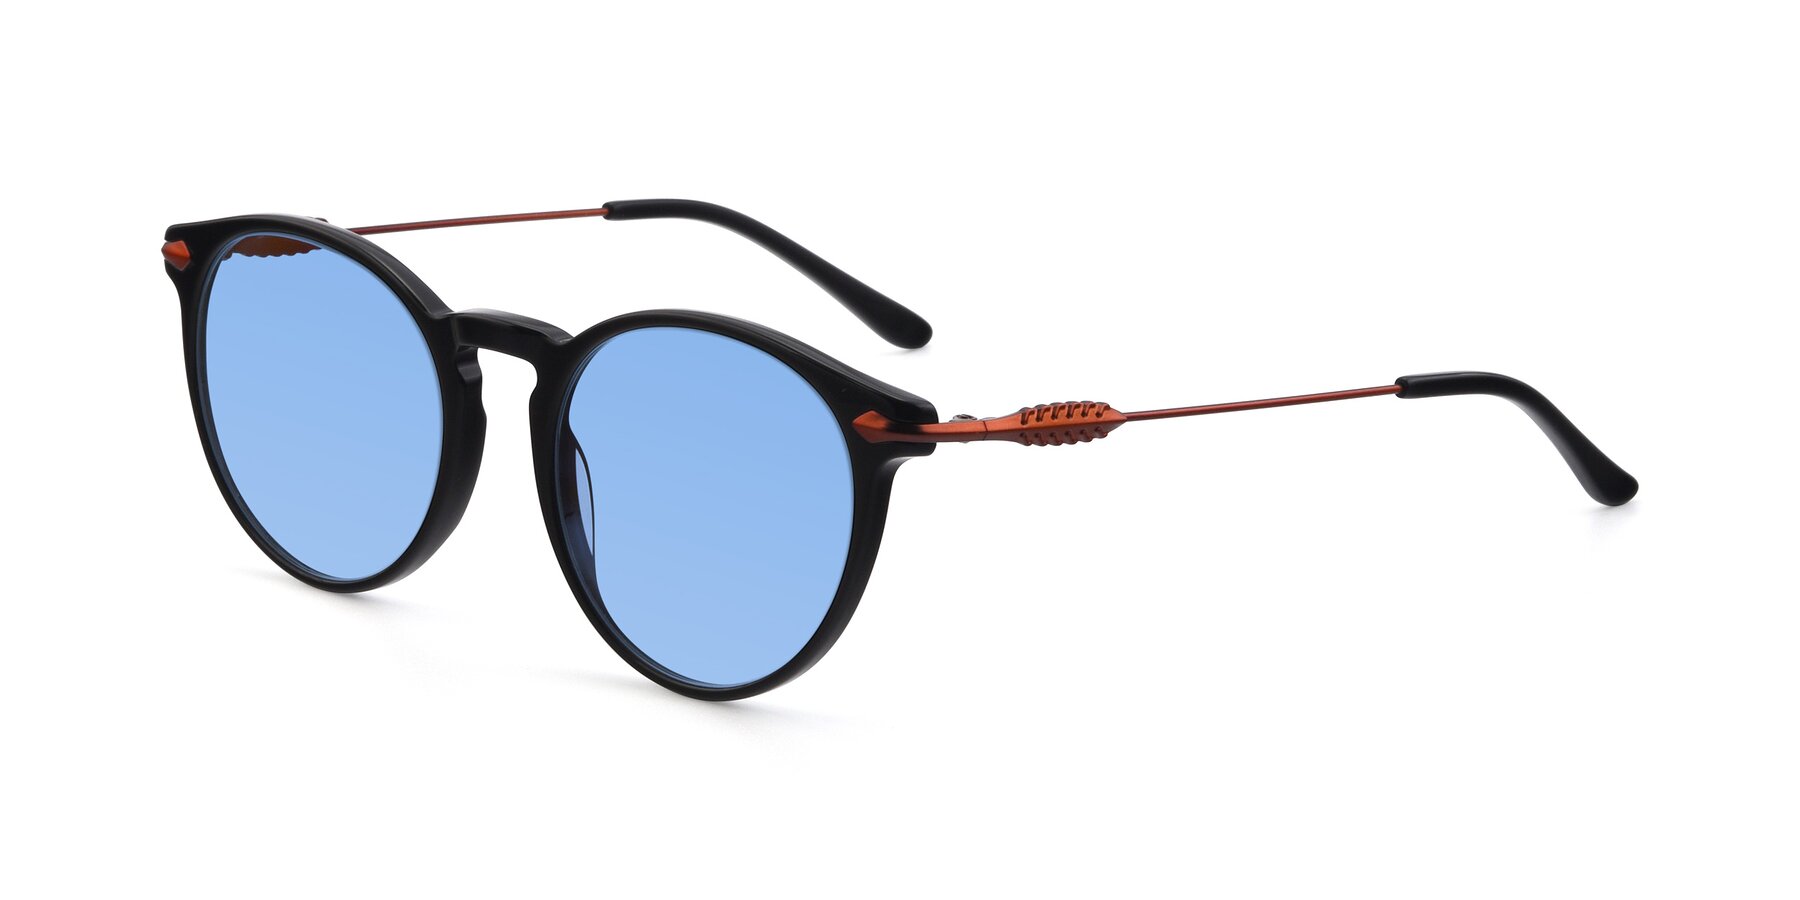 Angle of 17660 in Black with Medium Blue Tinted Lenses